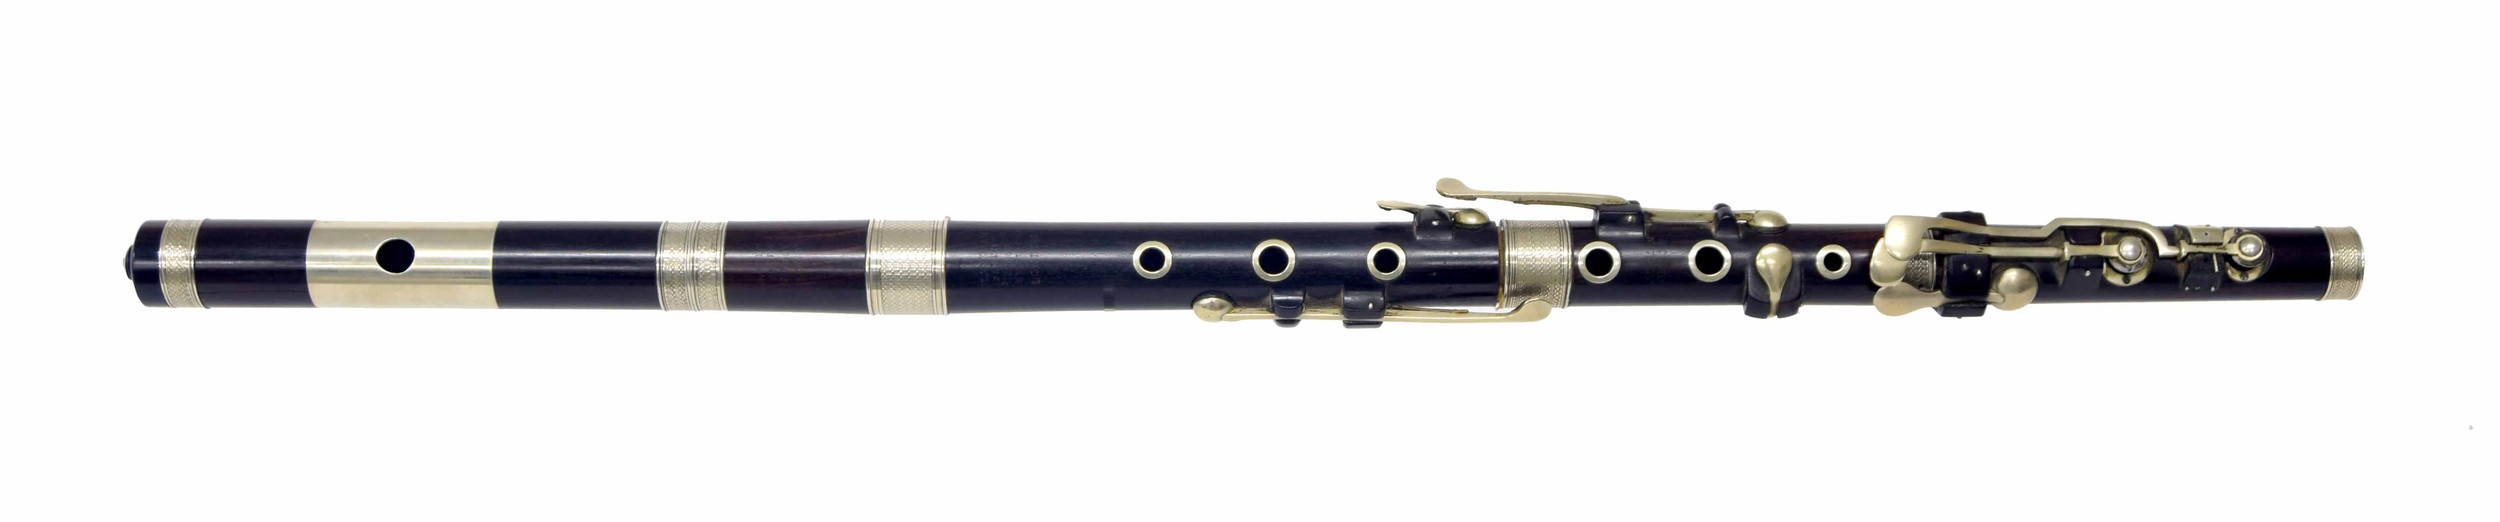 Fine rosewood flute by and stamped Blackman, Patent Improved, 2 Blackfriars Rd, London, with eight